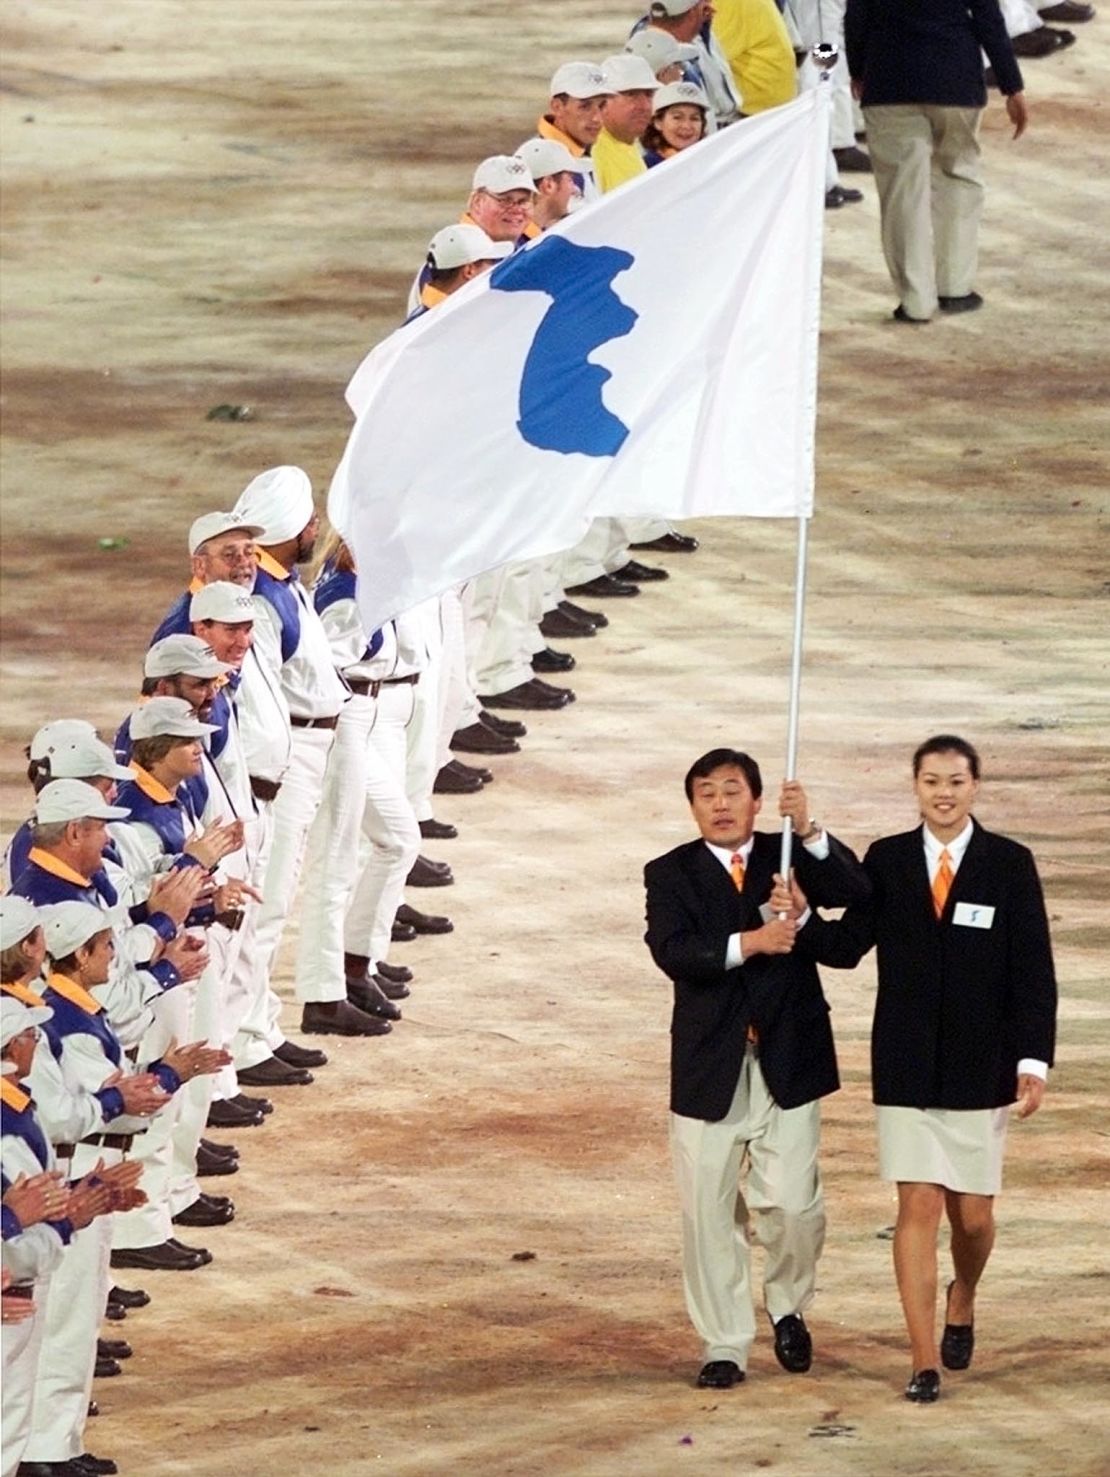 Flag bearers Jang Choo Pak (left) of North Korea and Eun-Soon Chung of South Korea carry a special flag with the image of the Korean peninsula, at the head of their joint delegation during the opening ceremony of the 2000 Summer Olympics in Sydney 15 September 2000. 